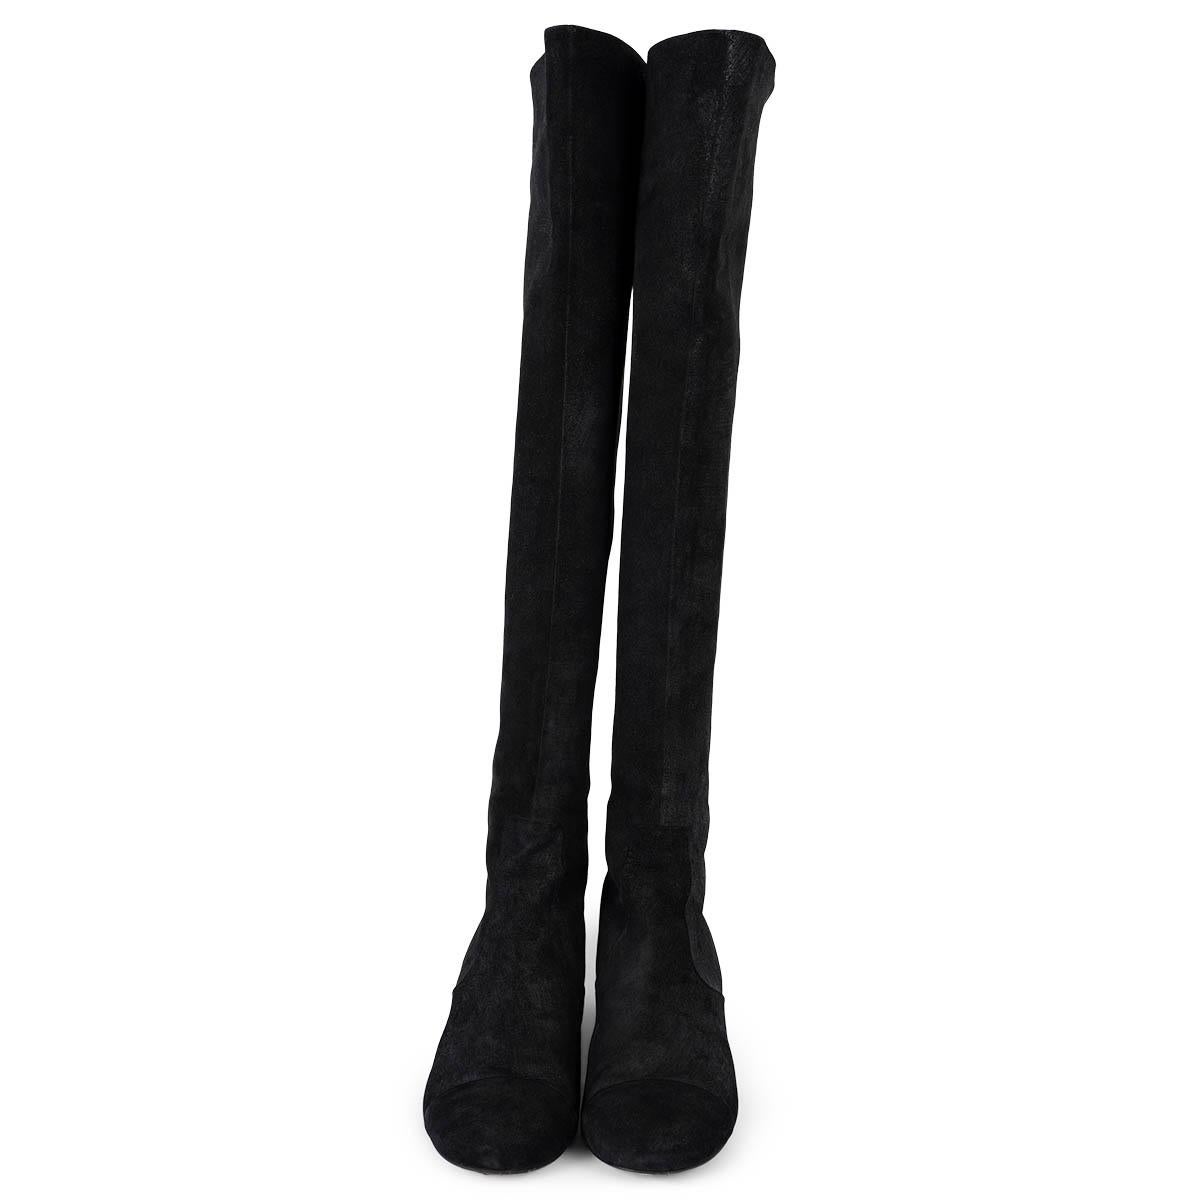 100% authentic Chanel over-knee boots in black textured suede featuring classic round cap toe and shiny black heel. Open with a zipper on the heel. Have been worn and are in excellent condition. 

Measurements
Model	G29233
Imprinted Size	39.5
Shoe